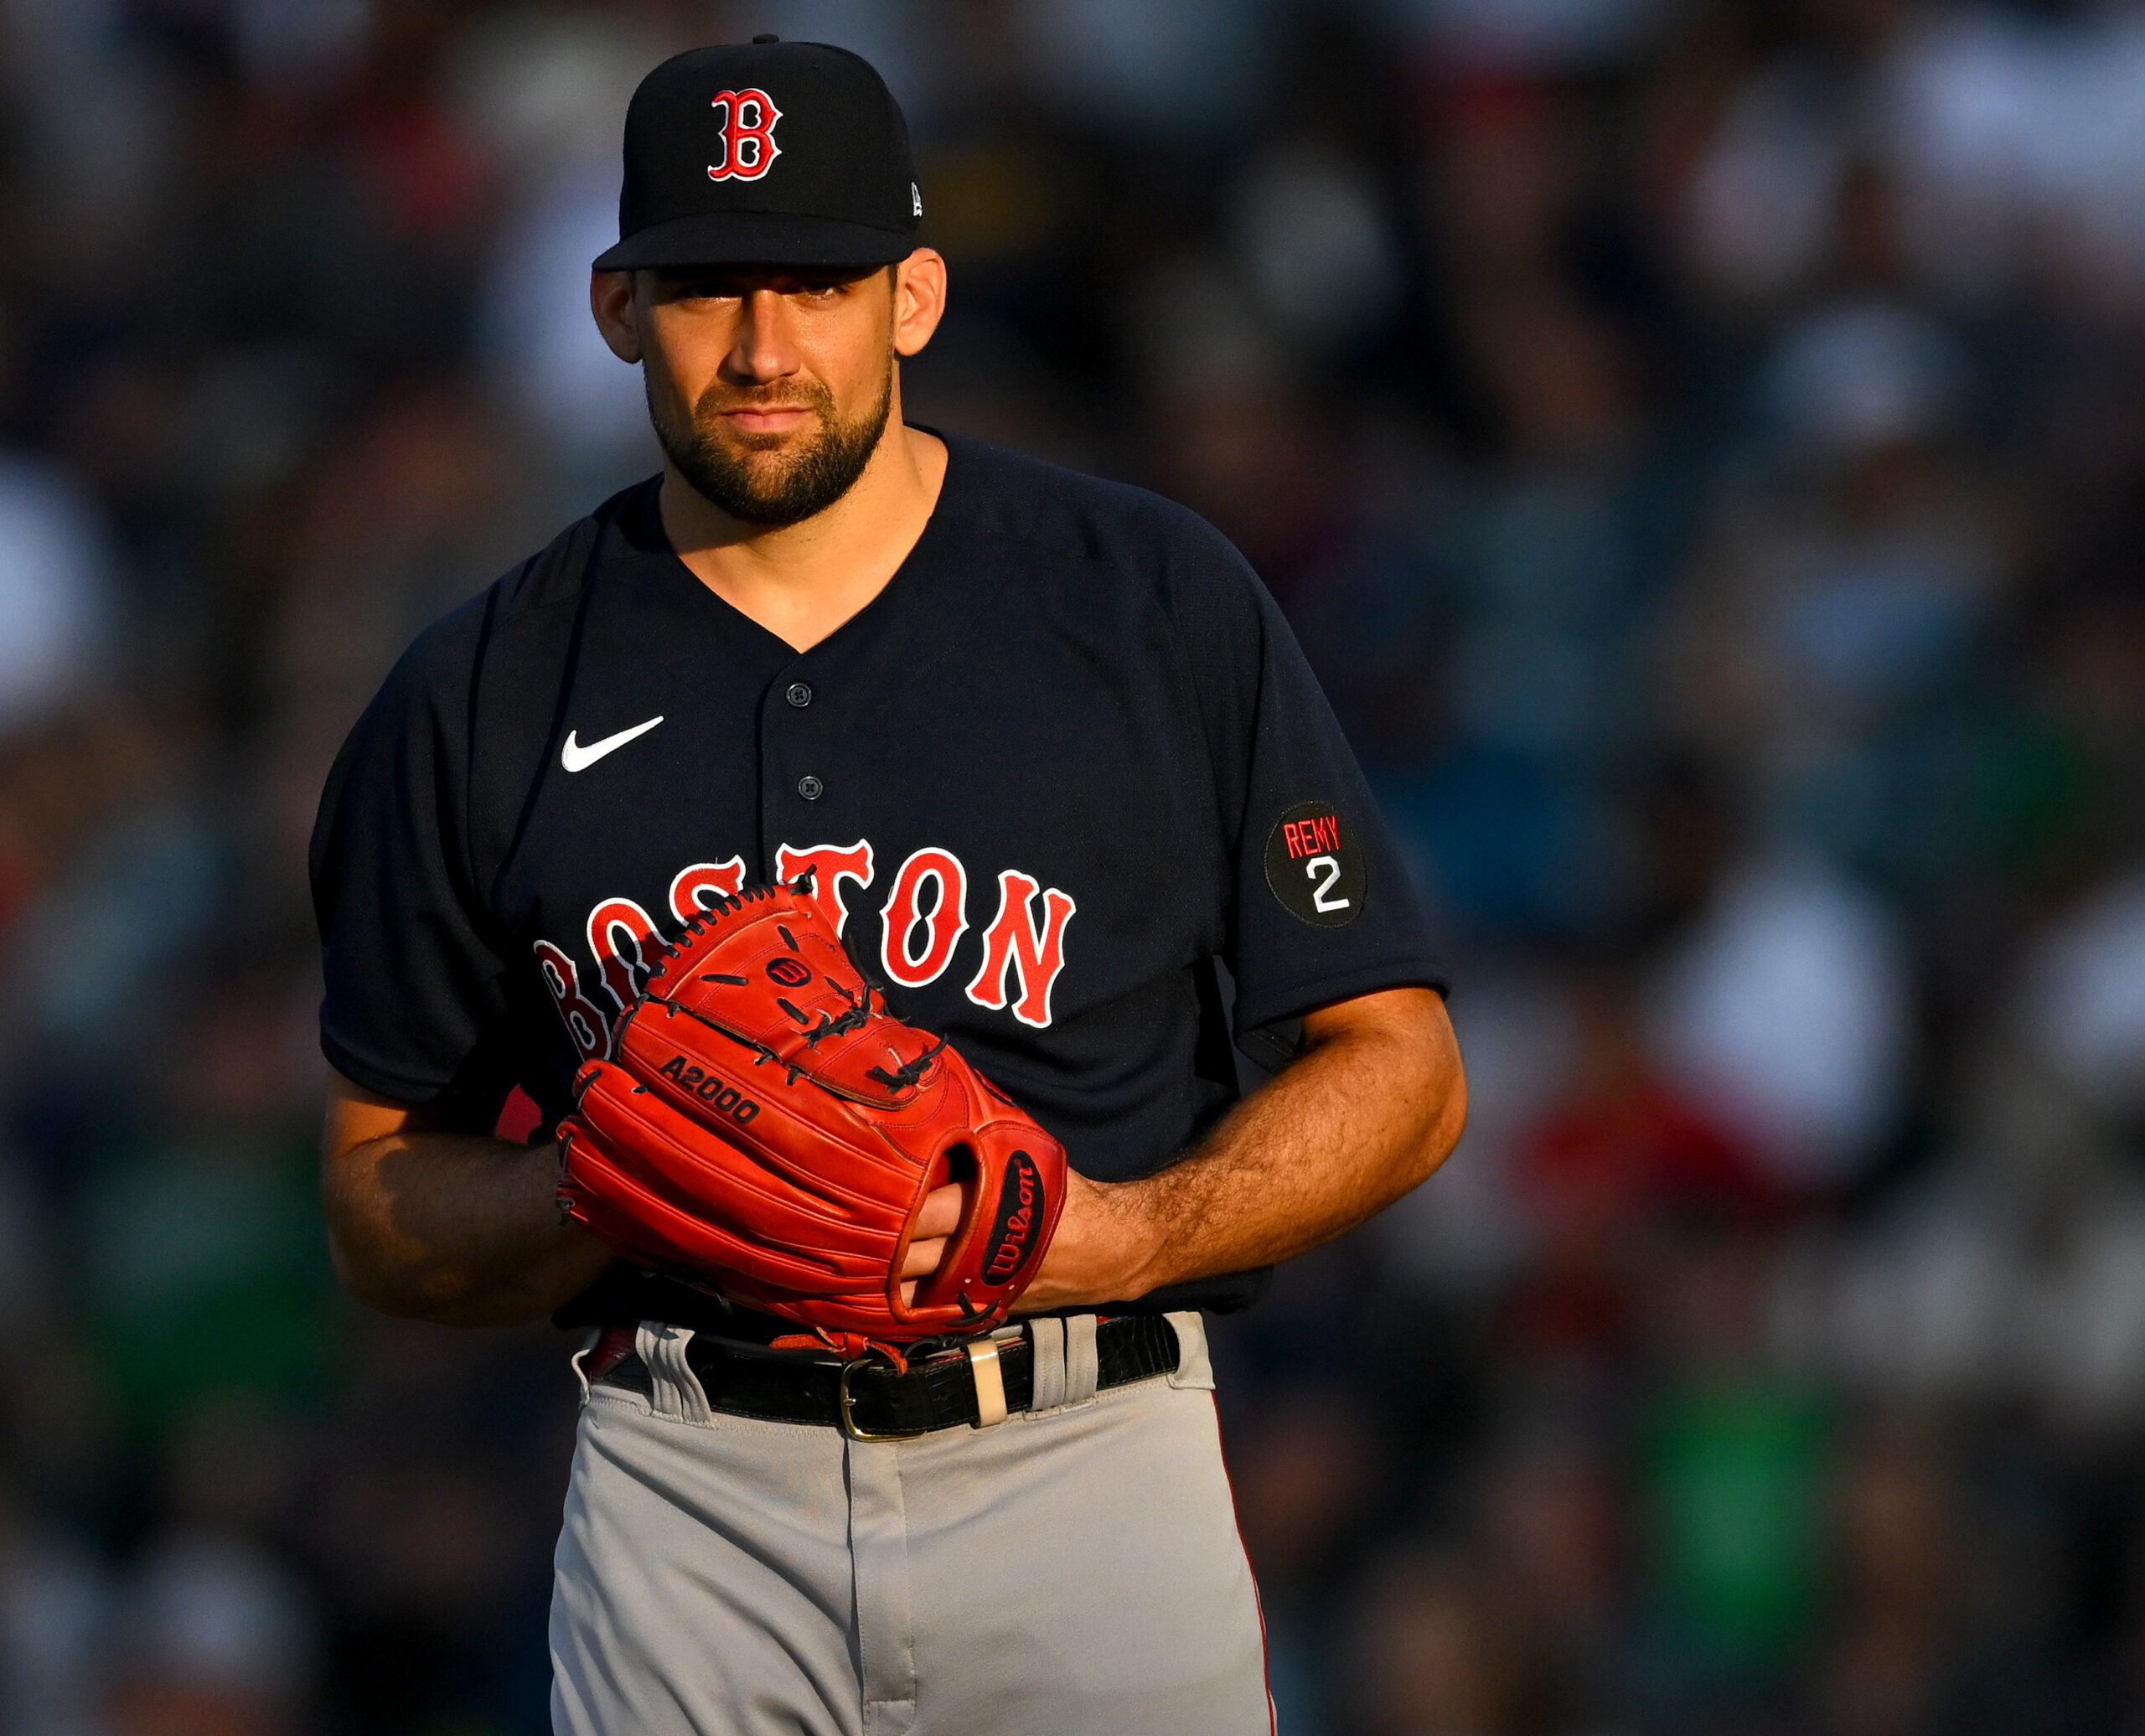 What's Next for Nathan Eovaldi?